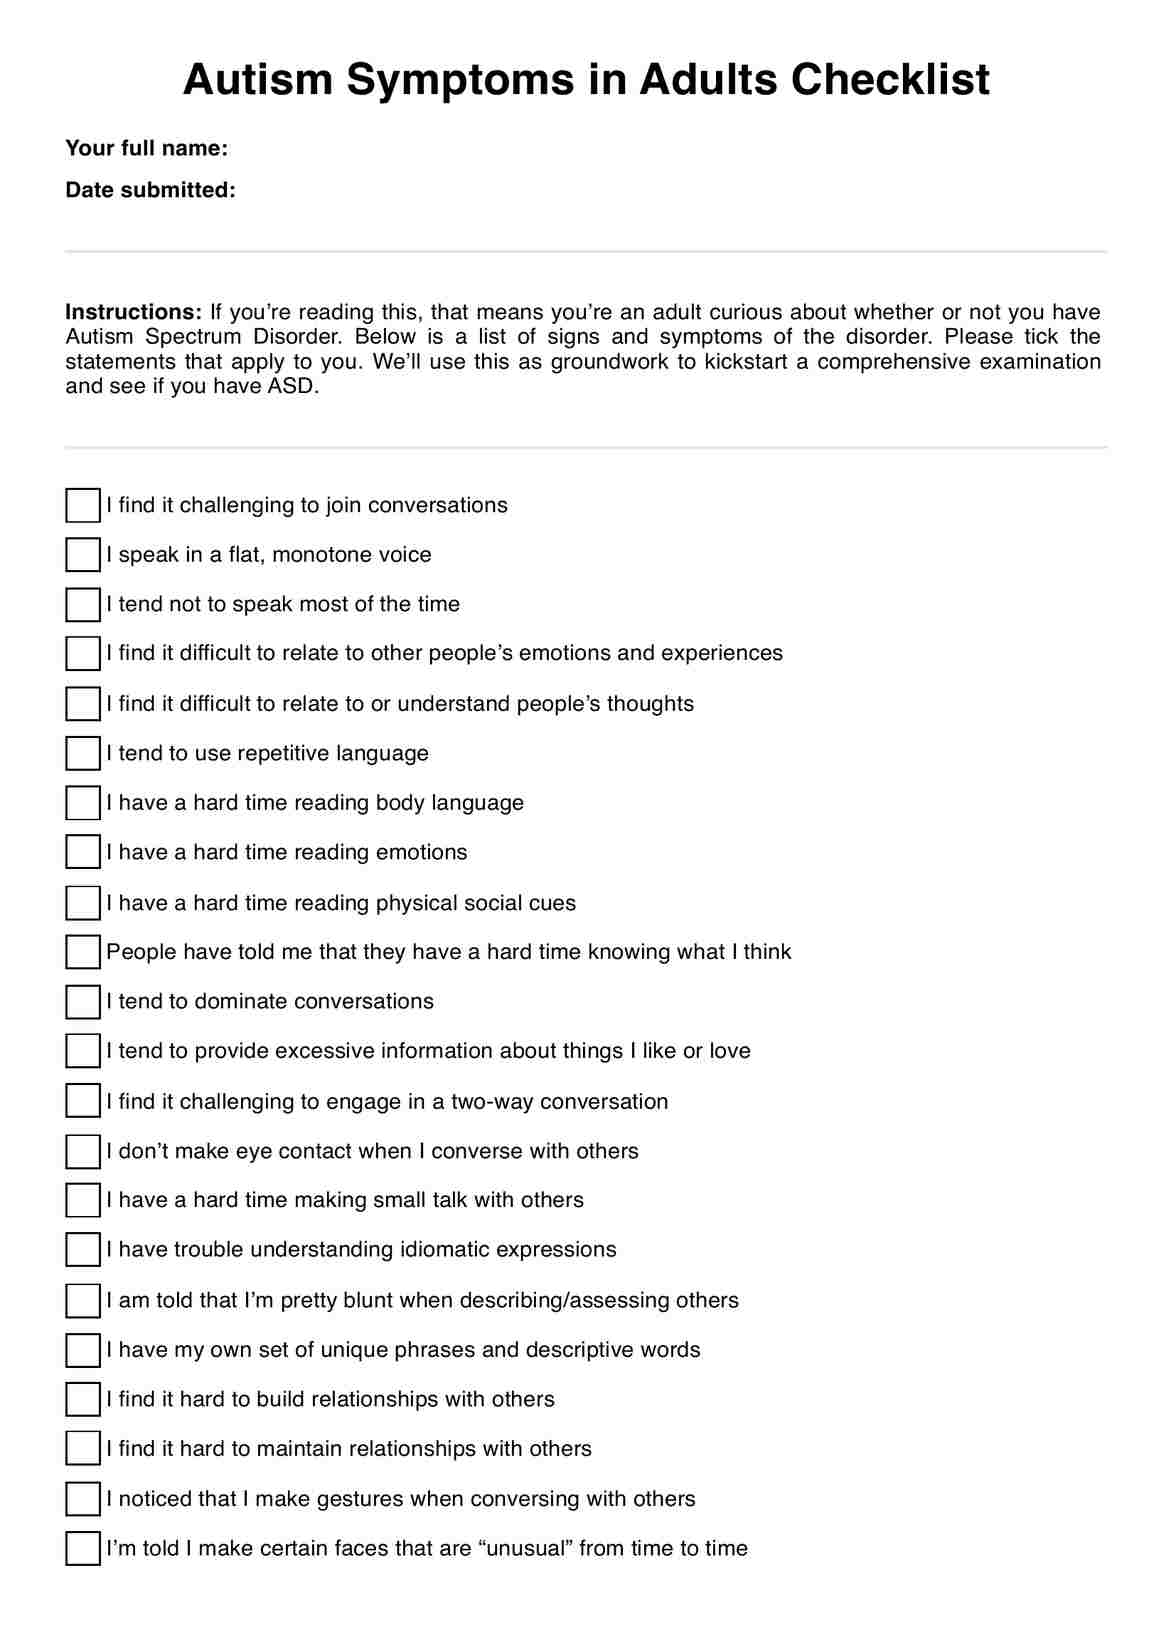 Autism Symptoms in Adults Checklist PDF Example